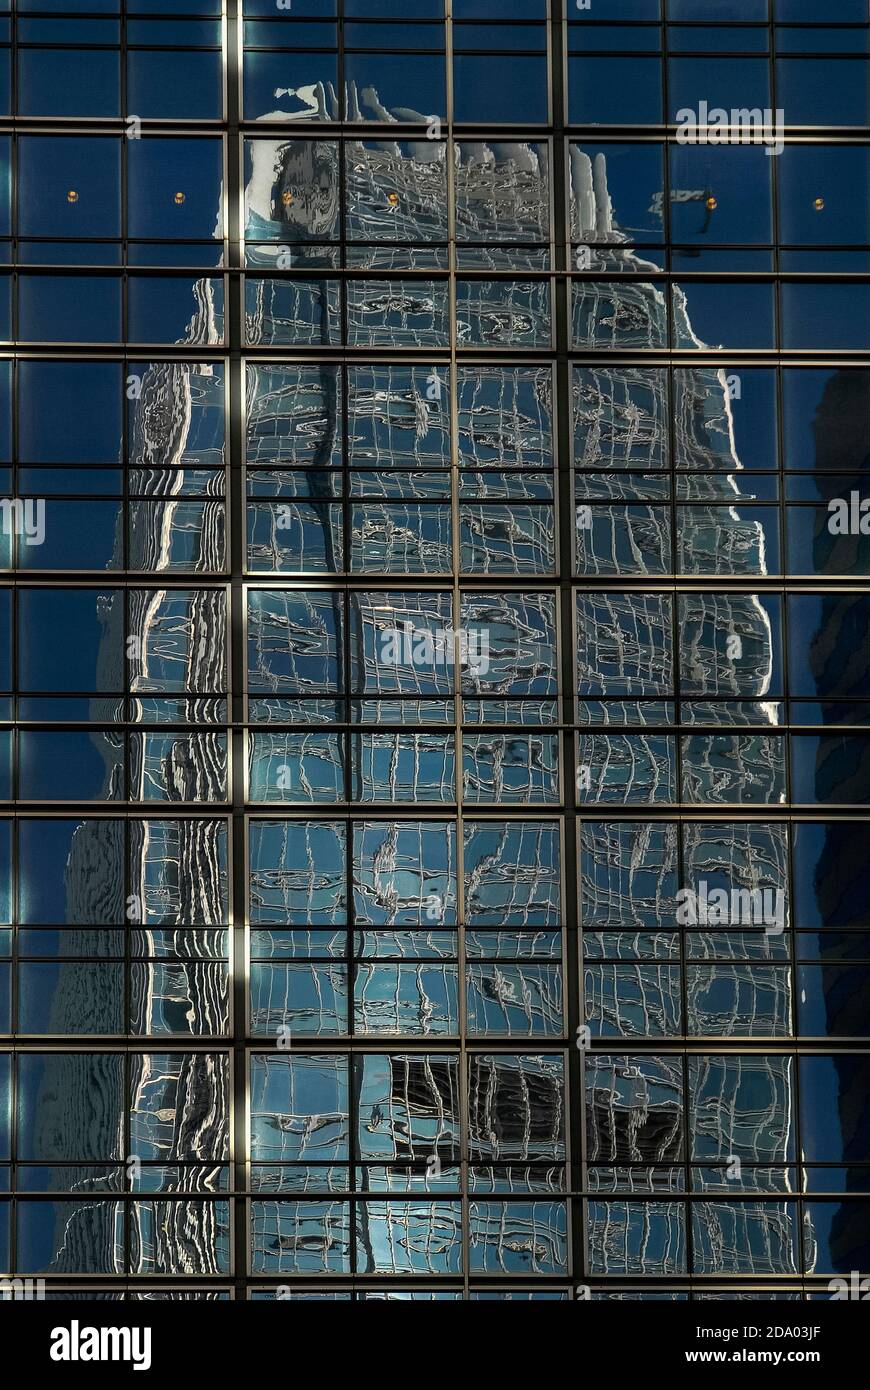 The upper floors of one of the world’s tallest buildings, the 420m-high (1,378 ft) International Finance Centre Two (IFC2), are contorted and distorted into a mass of tangled metal and glass when they are seen reflected in the cladding on the side of the J.P. Morgan office tower in Chung Wan or Central District in Hong Kong, China. Stock Photo